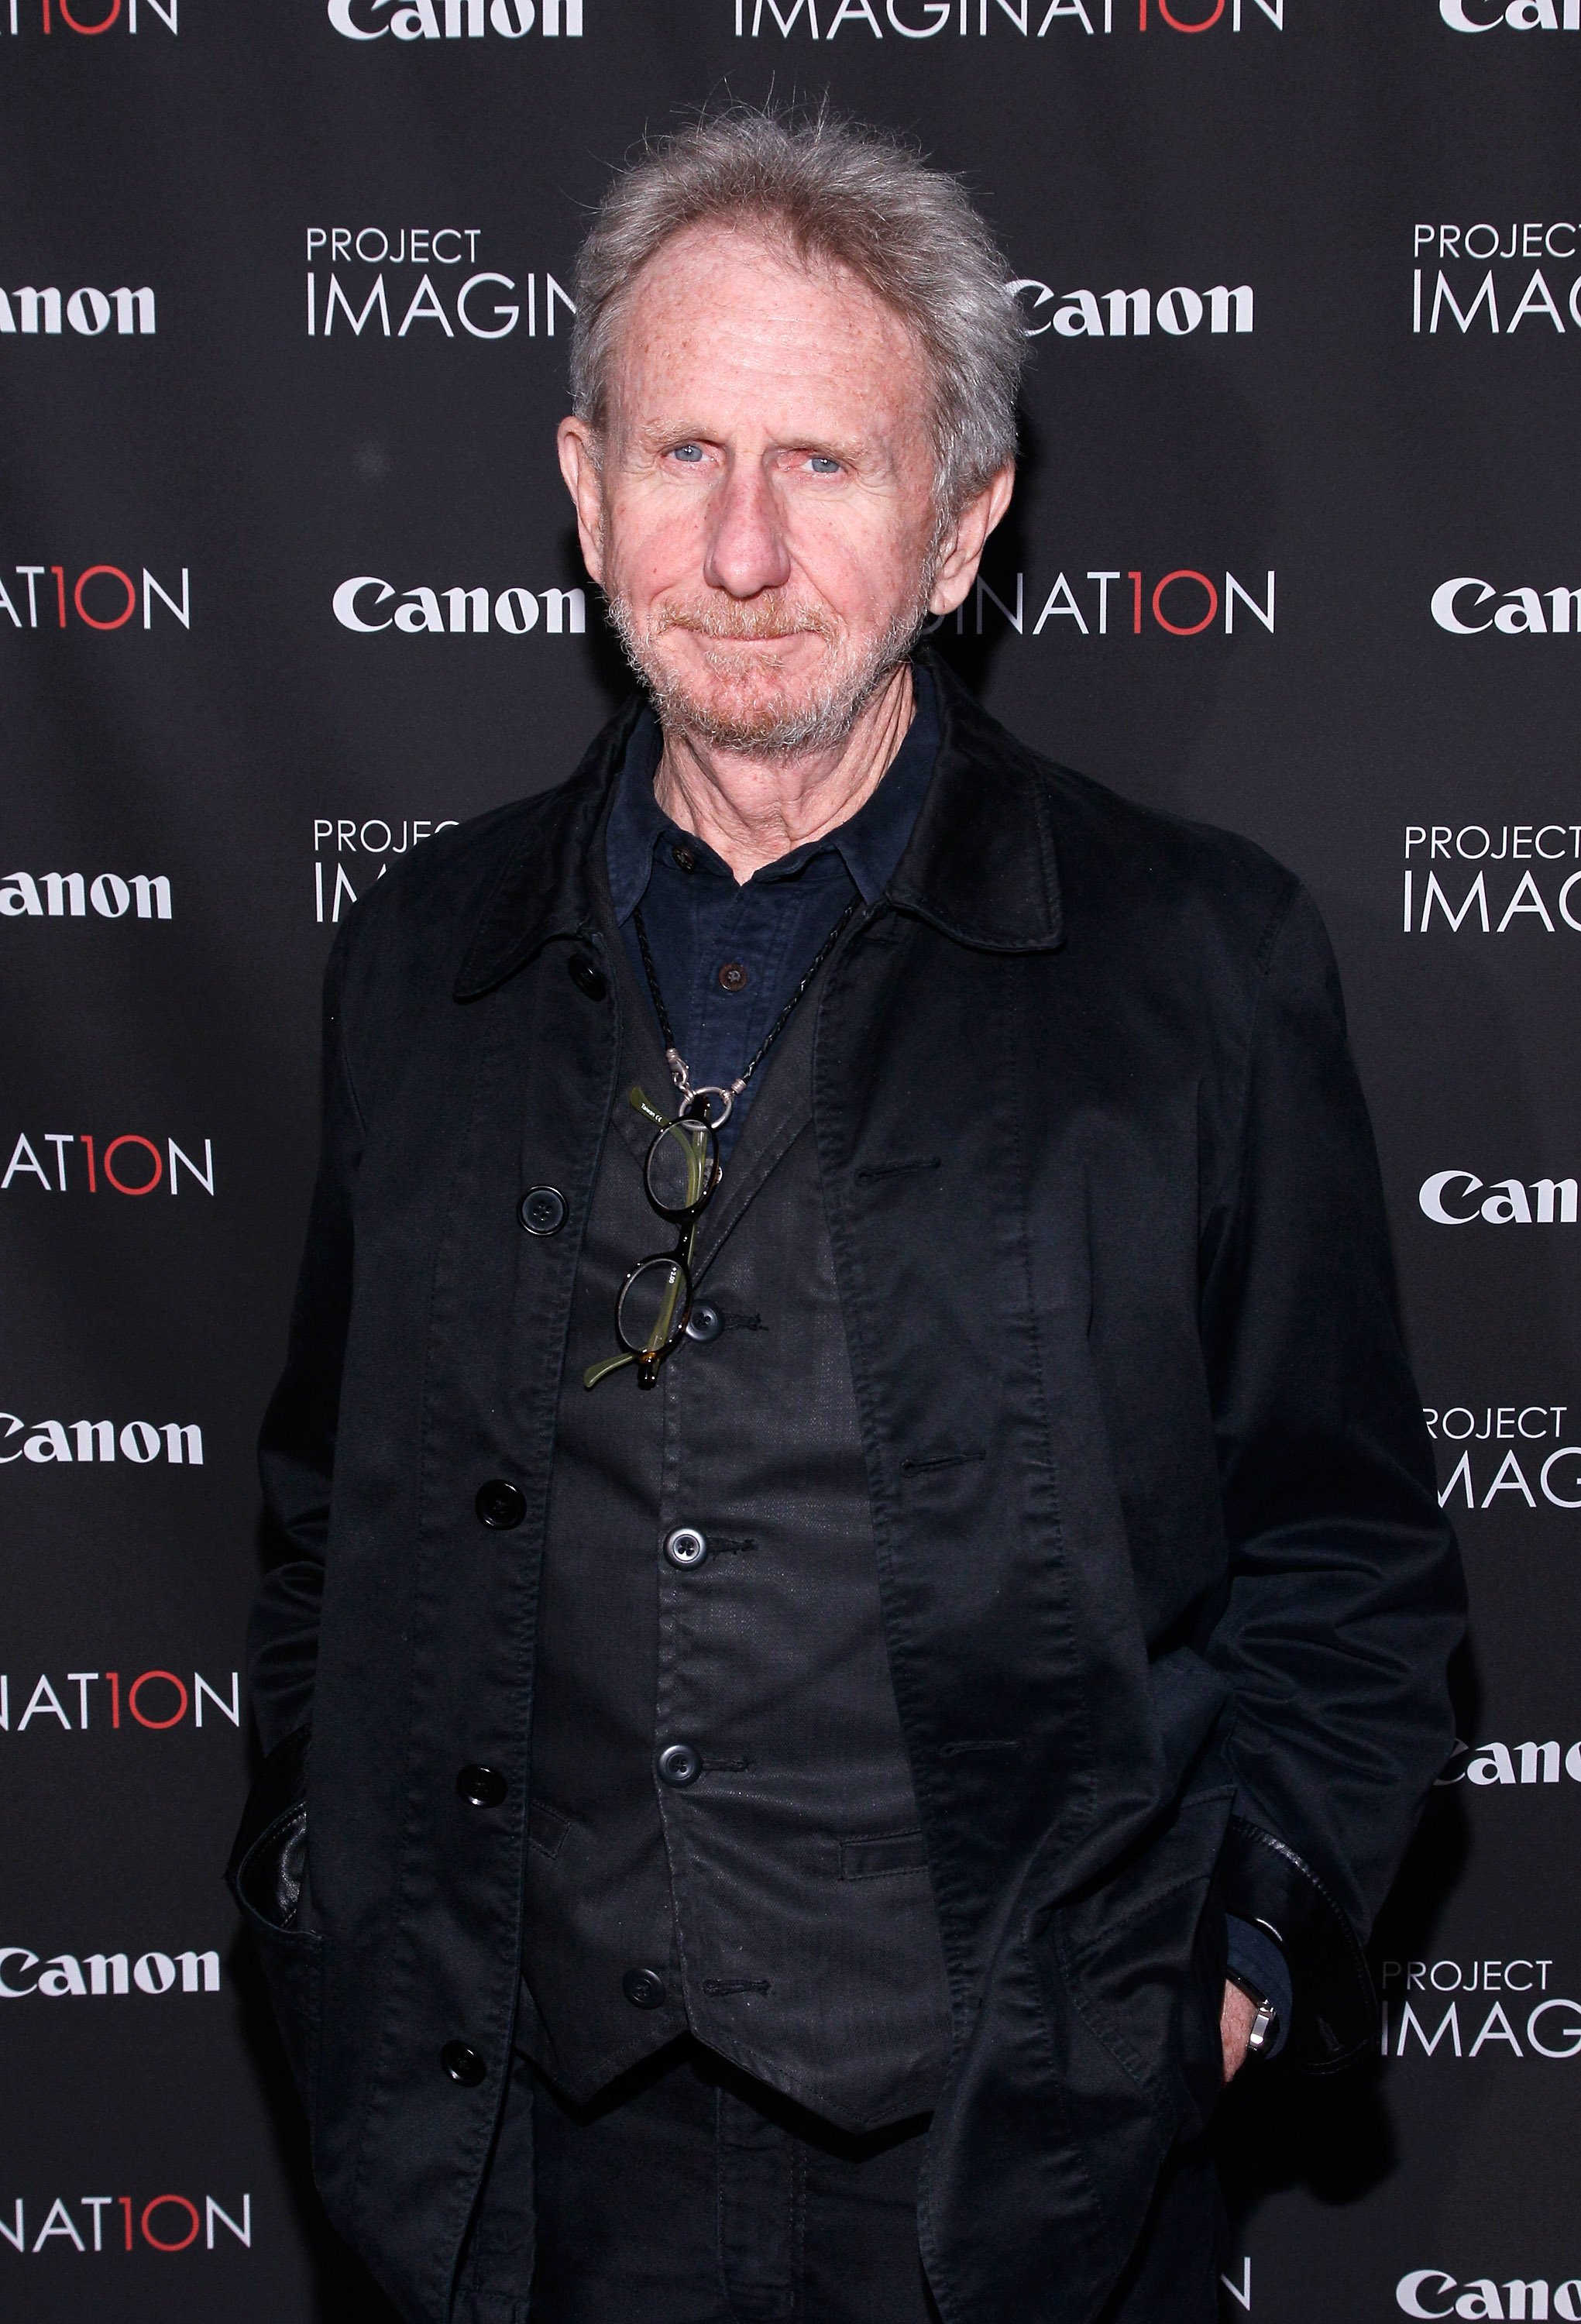 Rene Auberjonois at the Project Imaginat10n Film Festival on December 5, 2013 in New York City | Photo: Brian Ach/Getty Images